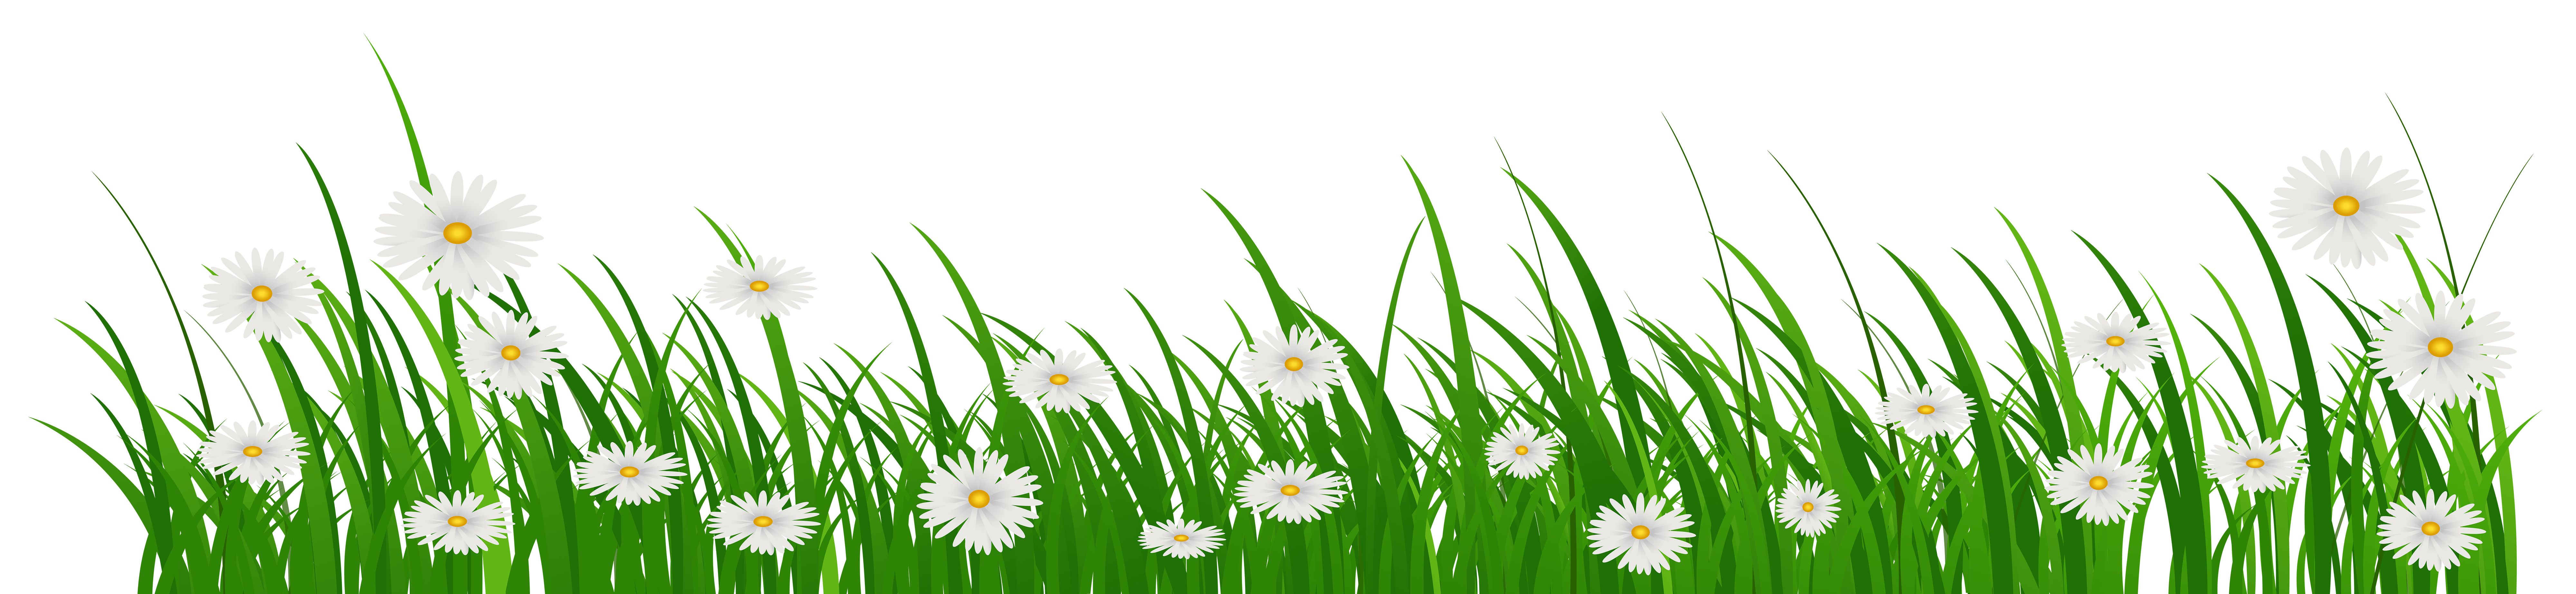 Grass with Flowers PNG Clip Art Image | Gallery Yopriceville 